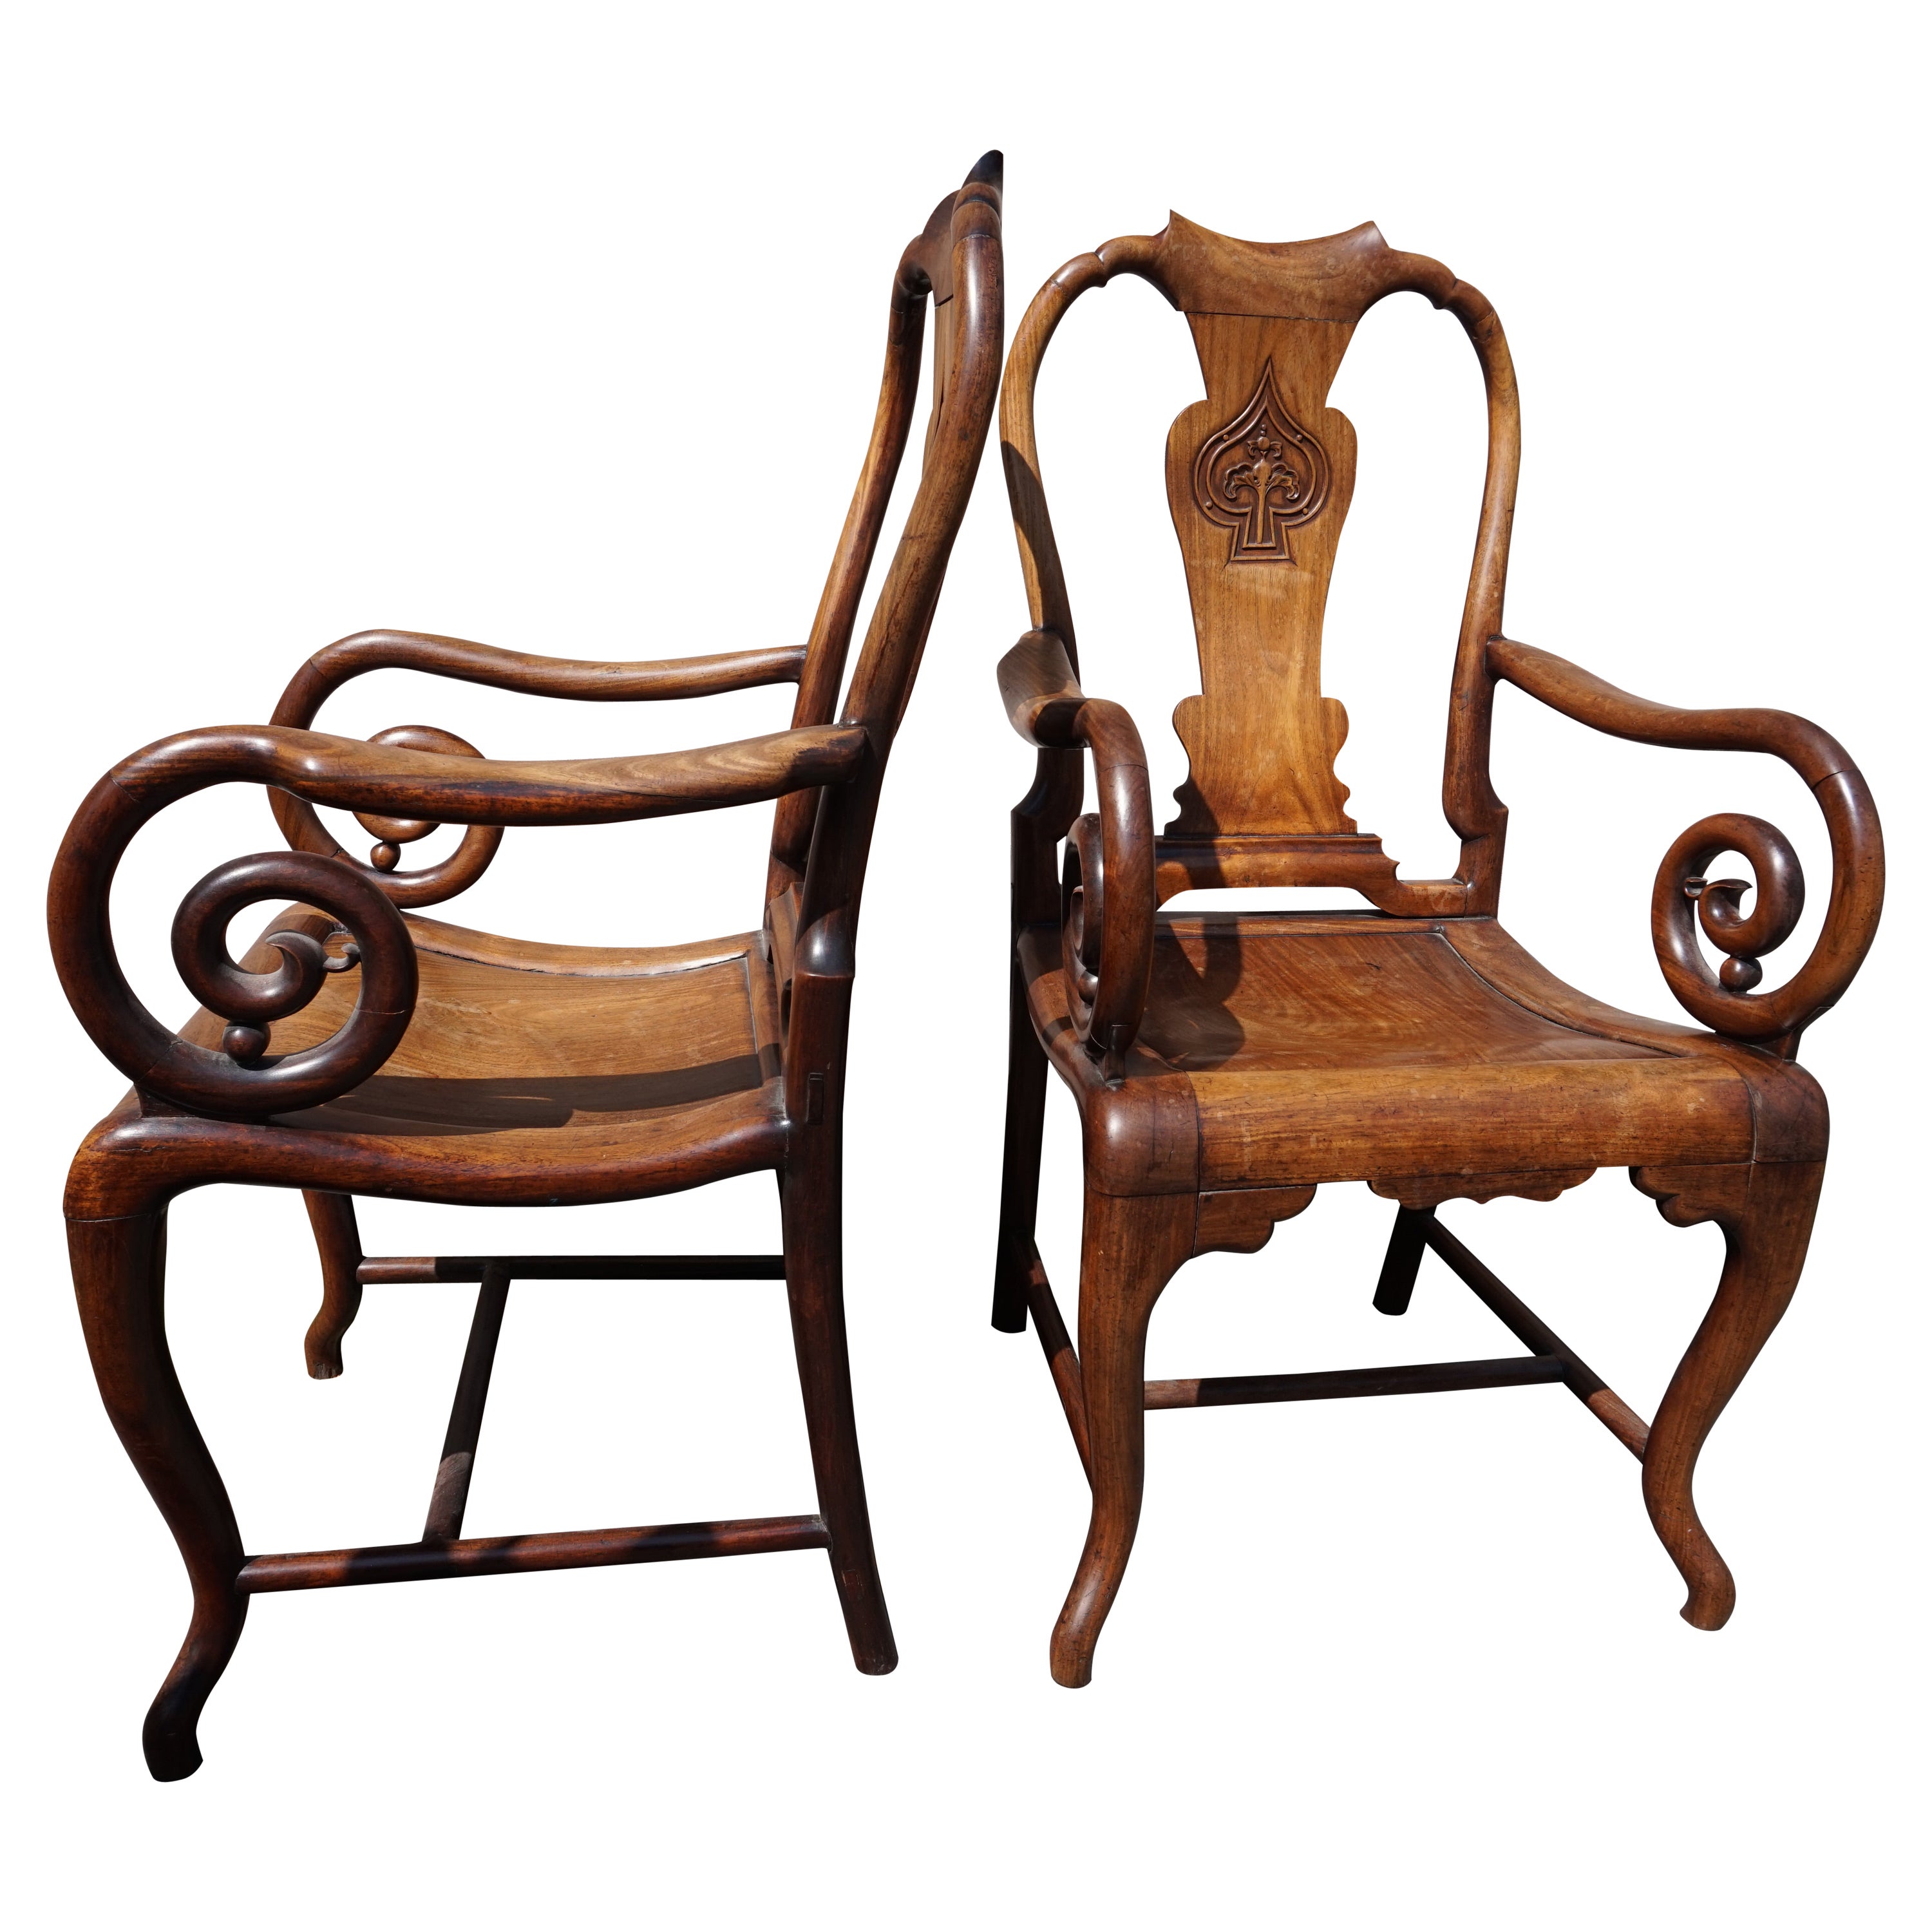 19th Century Fine Hand-Carved Rosewood Chinese Mahjong Chairs